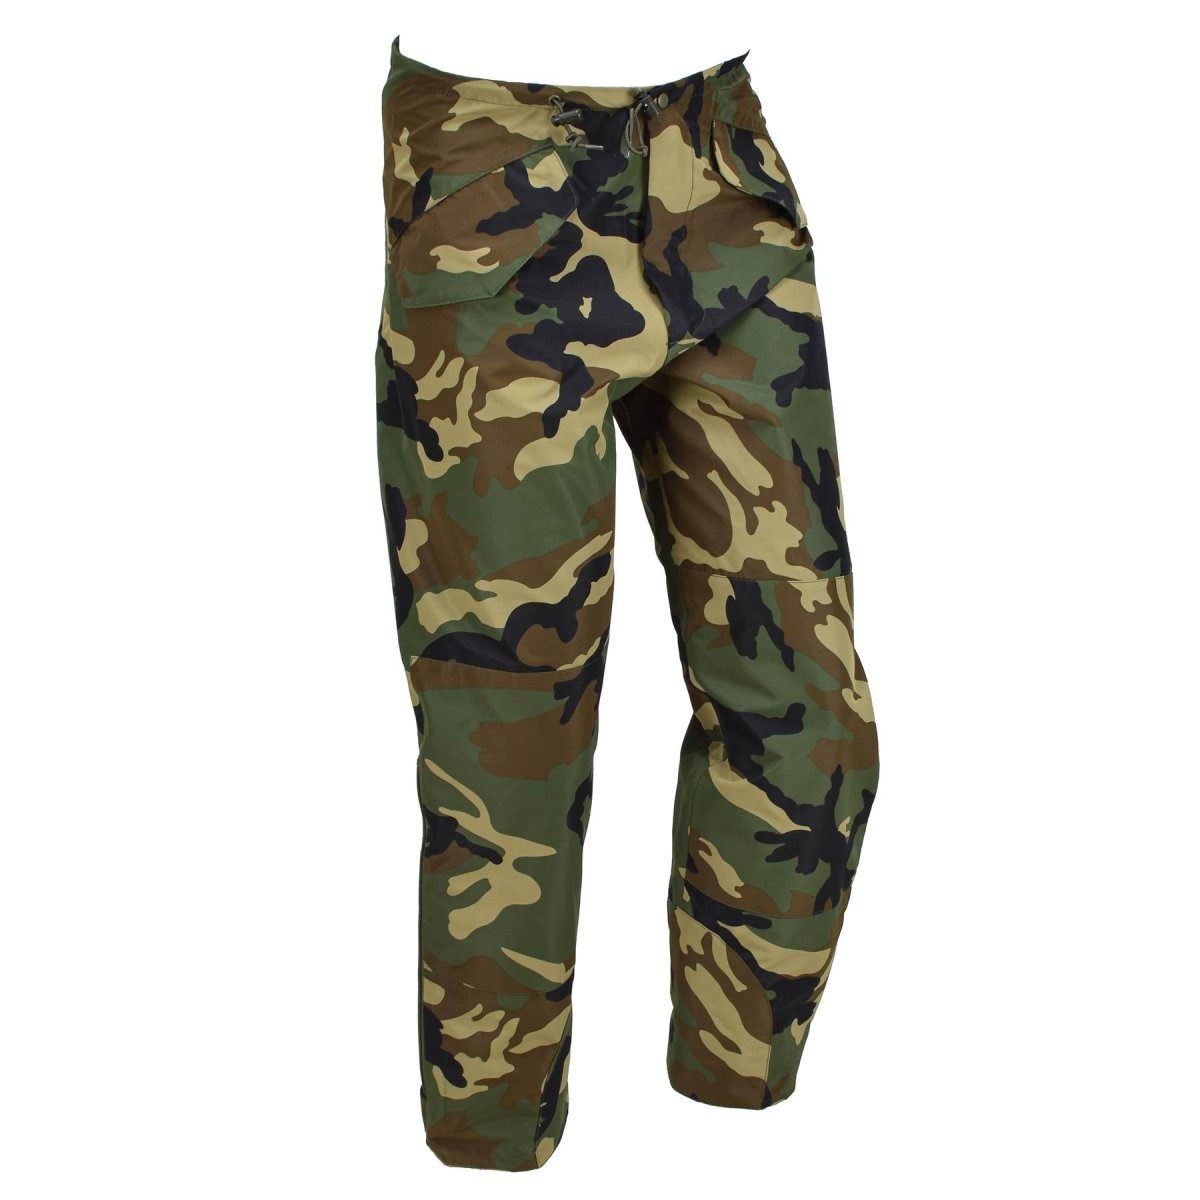 M-TAC Military quality tactical pants water-resistant ripstop trousers  Olive